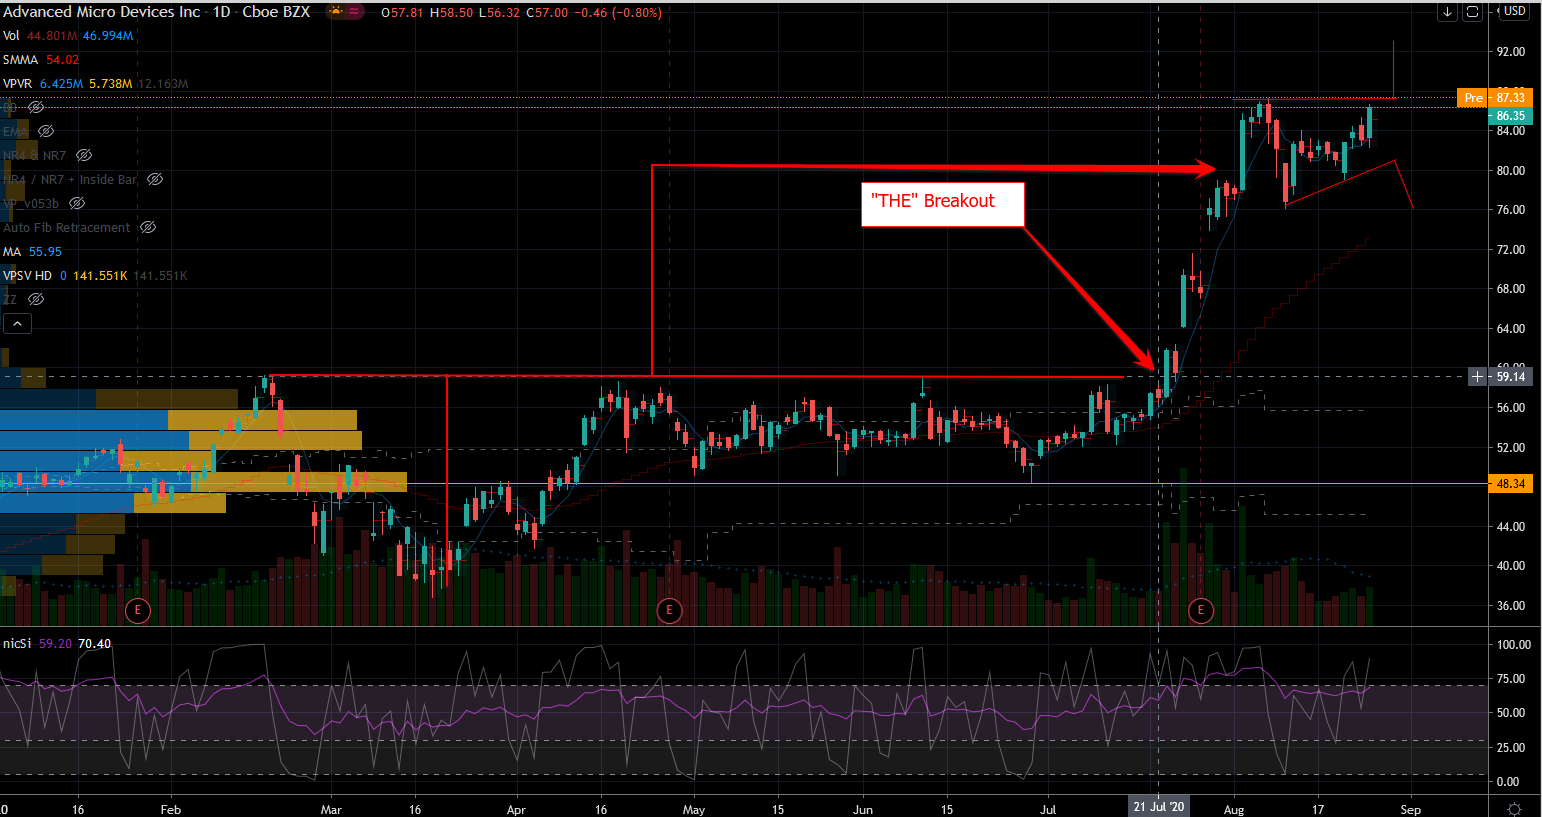 AMD Stock Chart Showing The Breakout Starting Point and Target